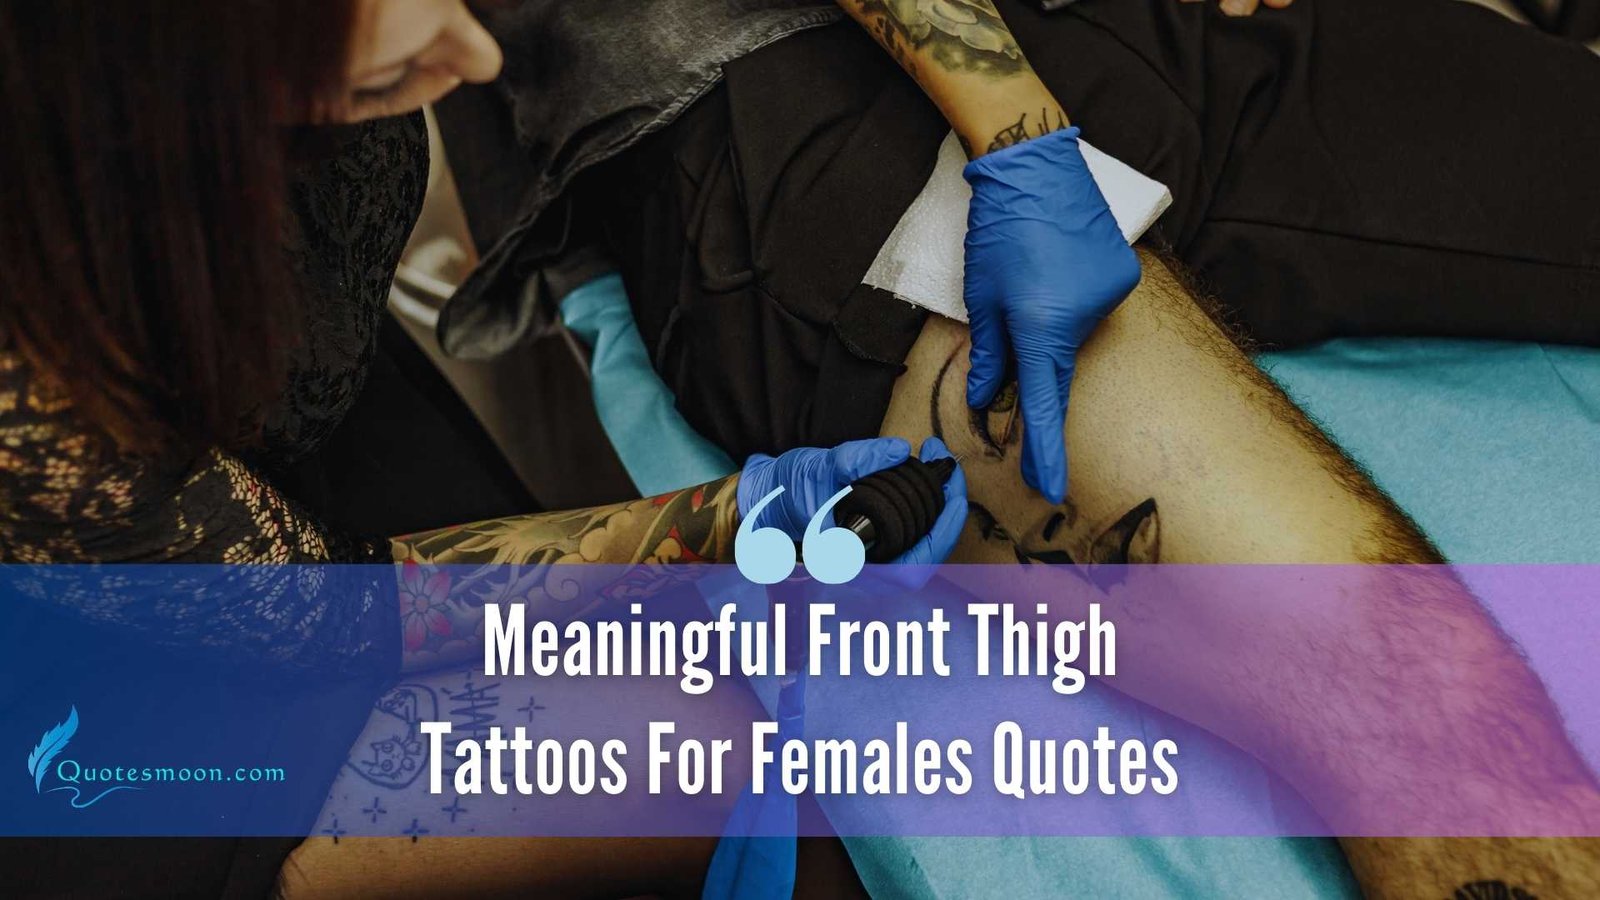 Meaningful Front Thigh Tattoos For Females Quotes